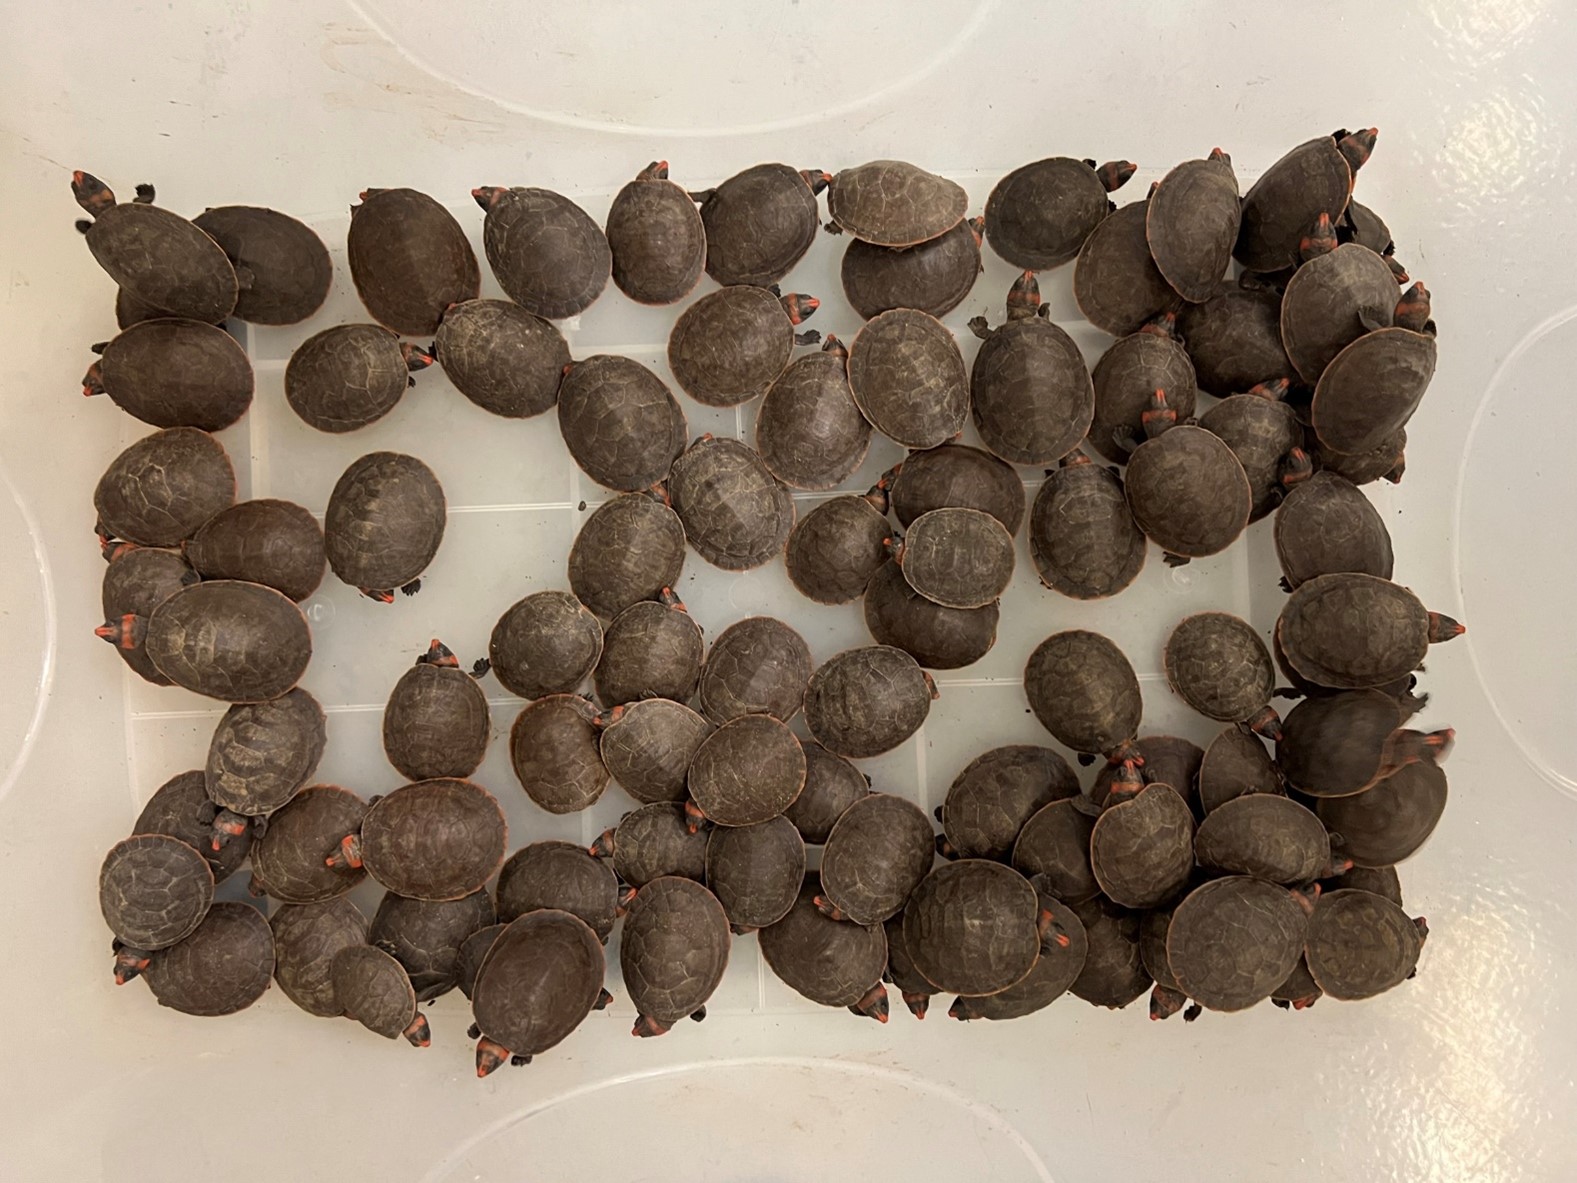 AFCD seized large batch of endangered red-headed Amazon river turtles